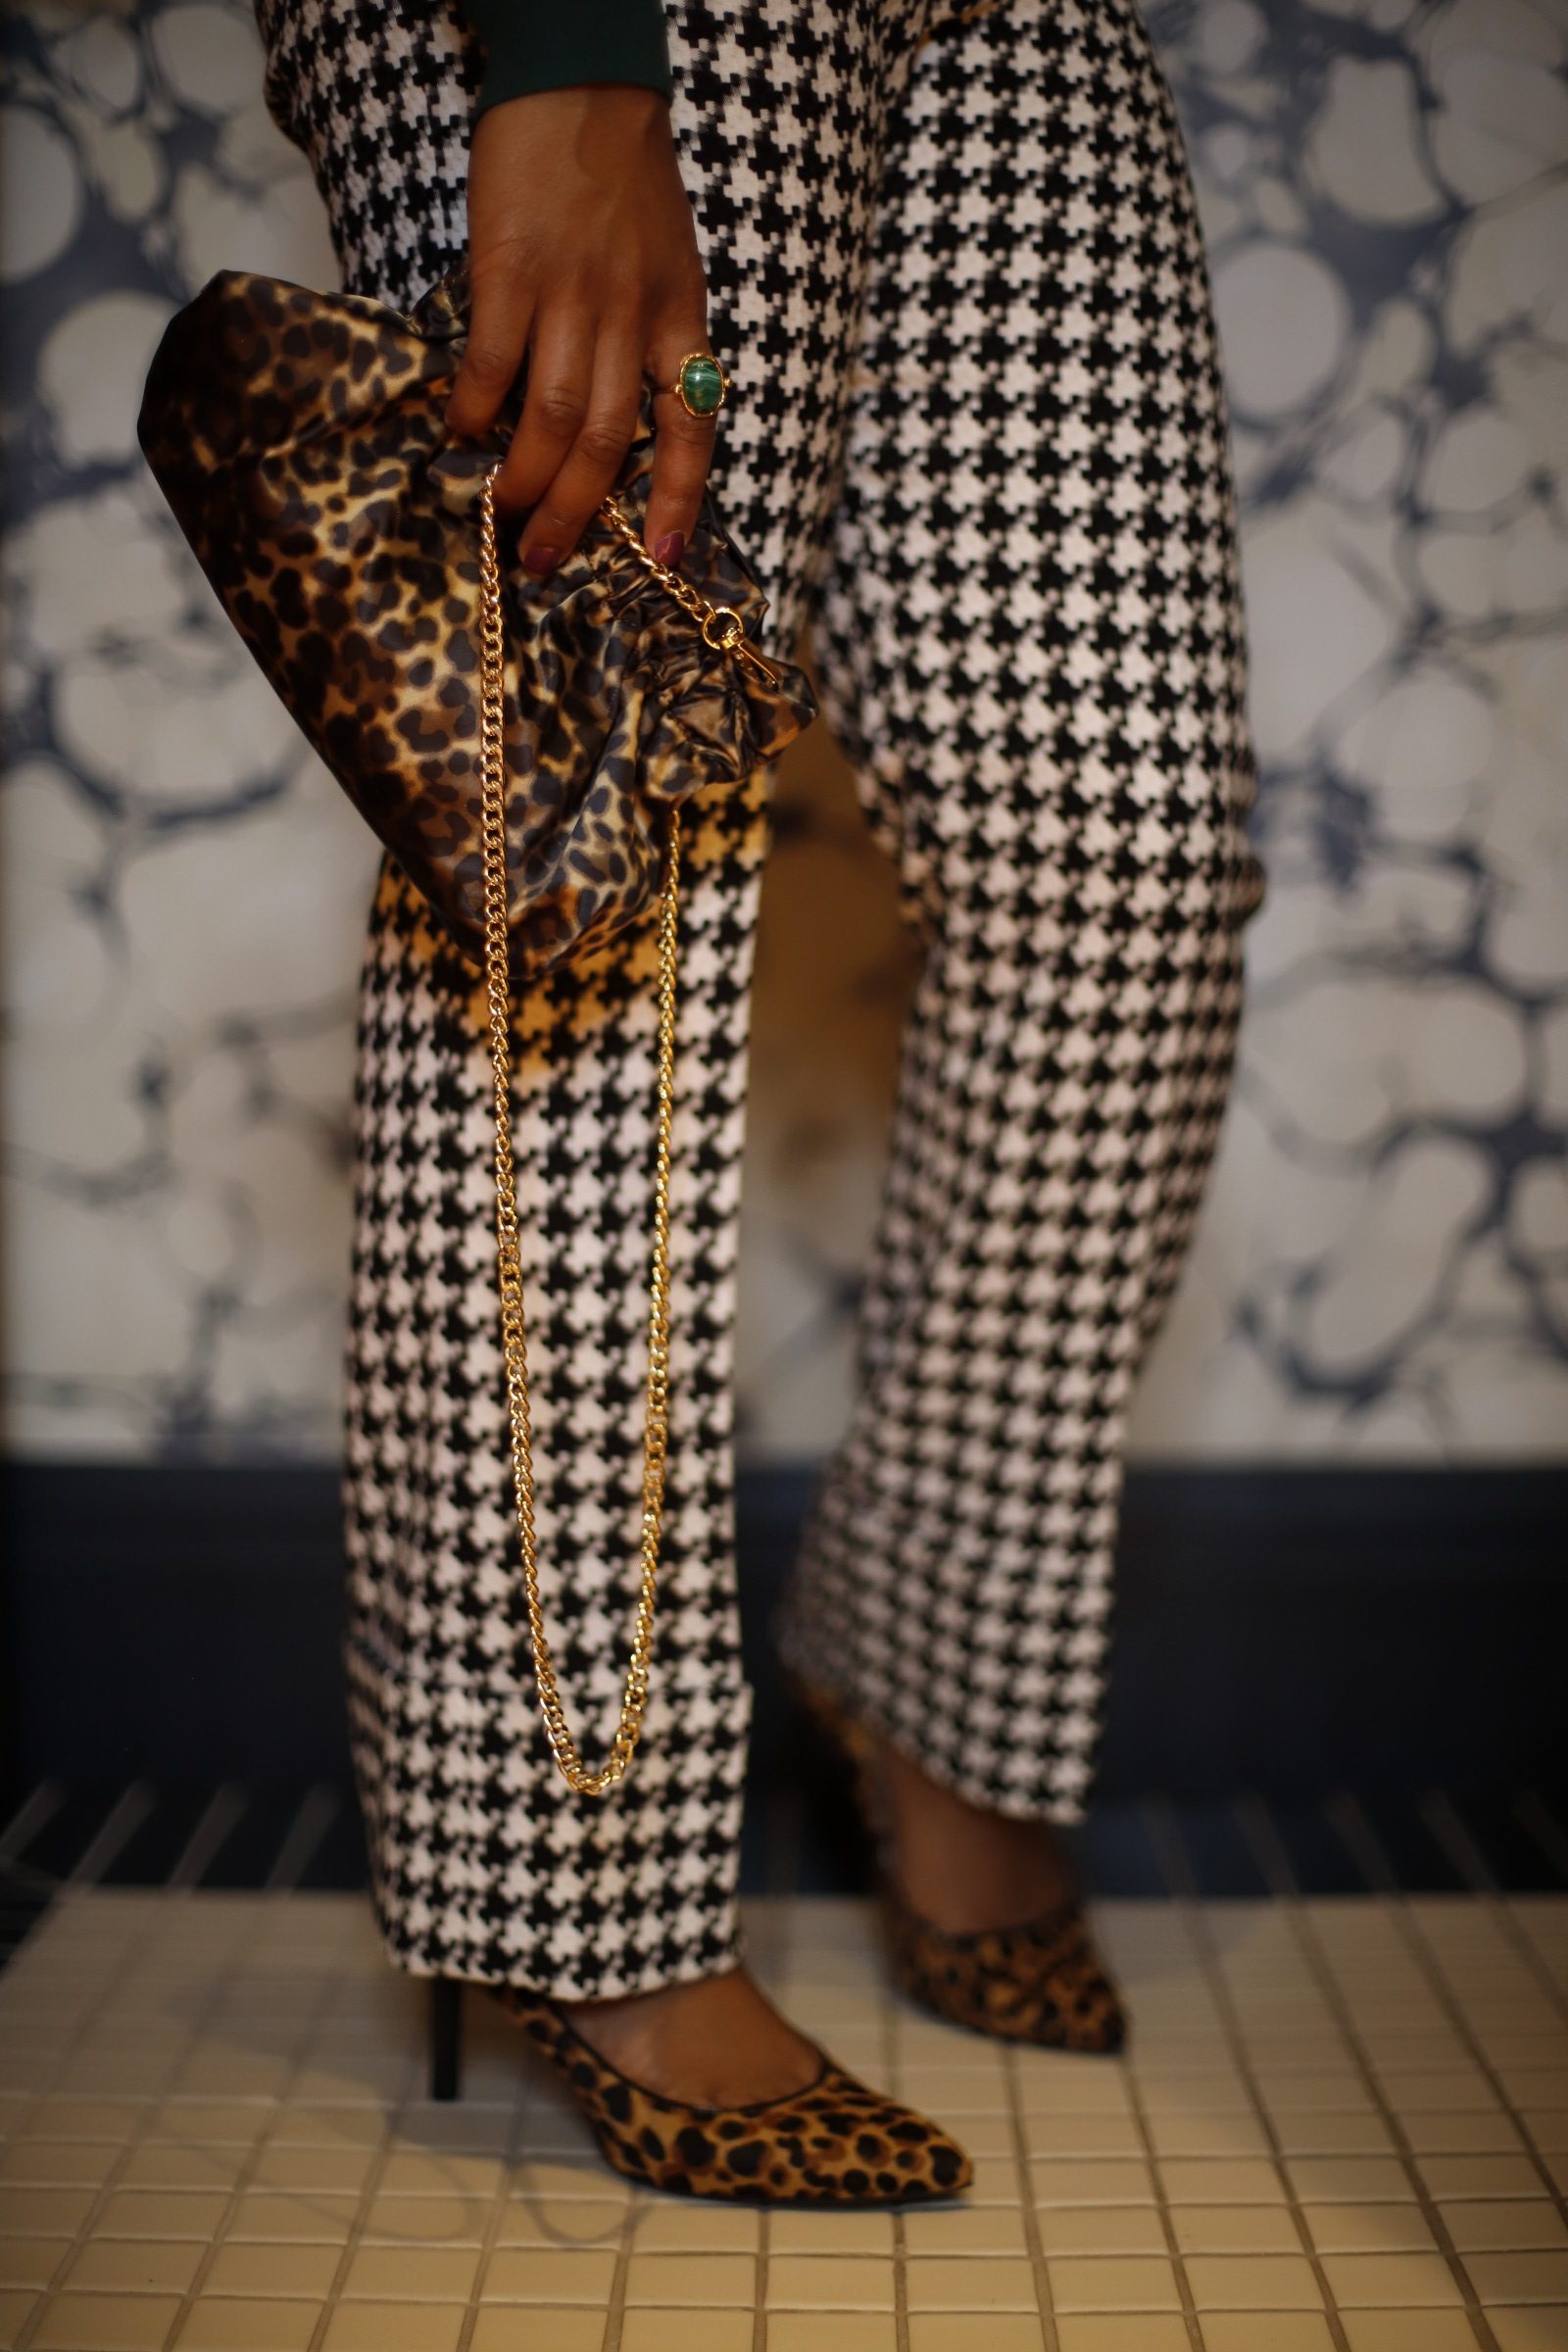 What I wear when: I want to wear houndstooth and leopard